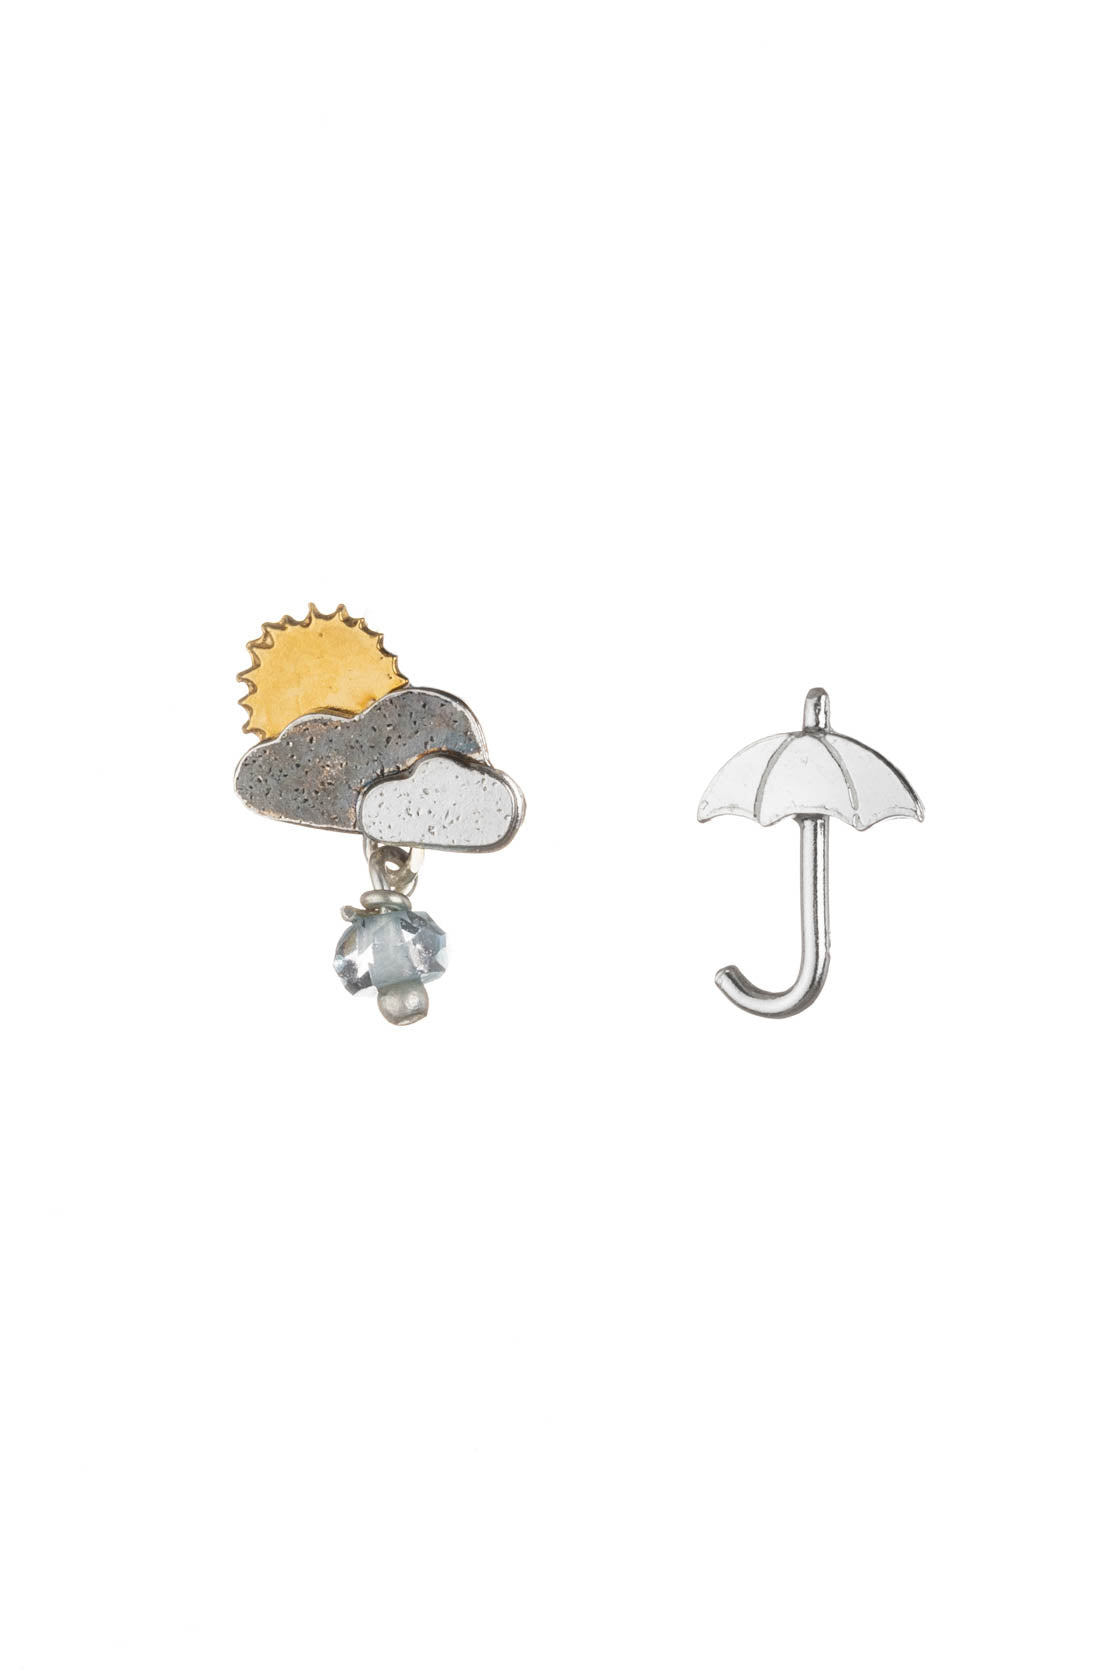 Sunshine Showers And Umbrella Mis-matched Stud Earrings